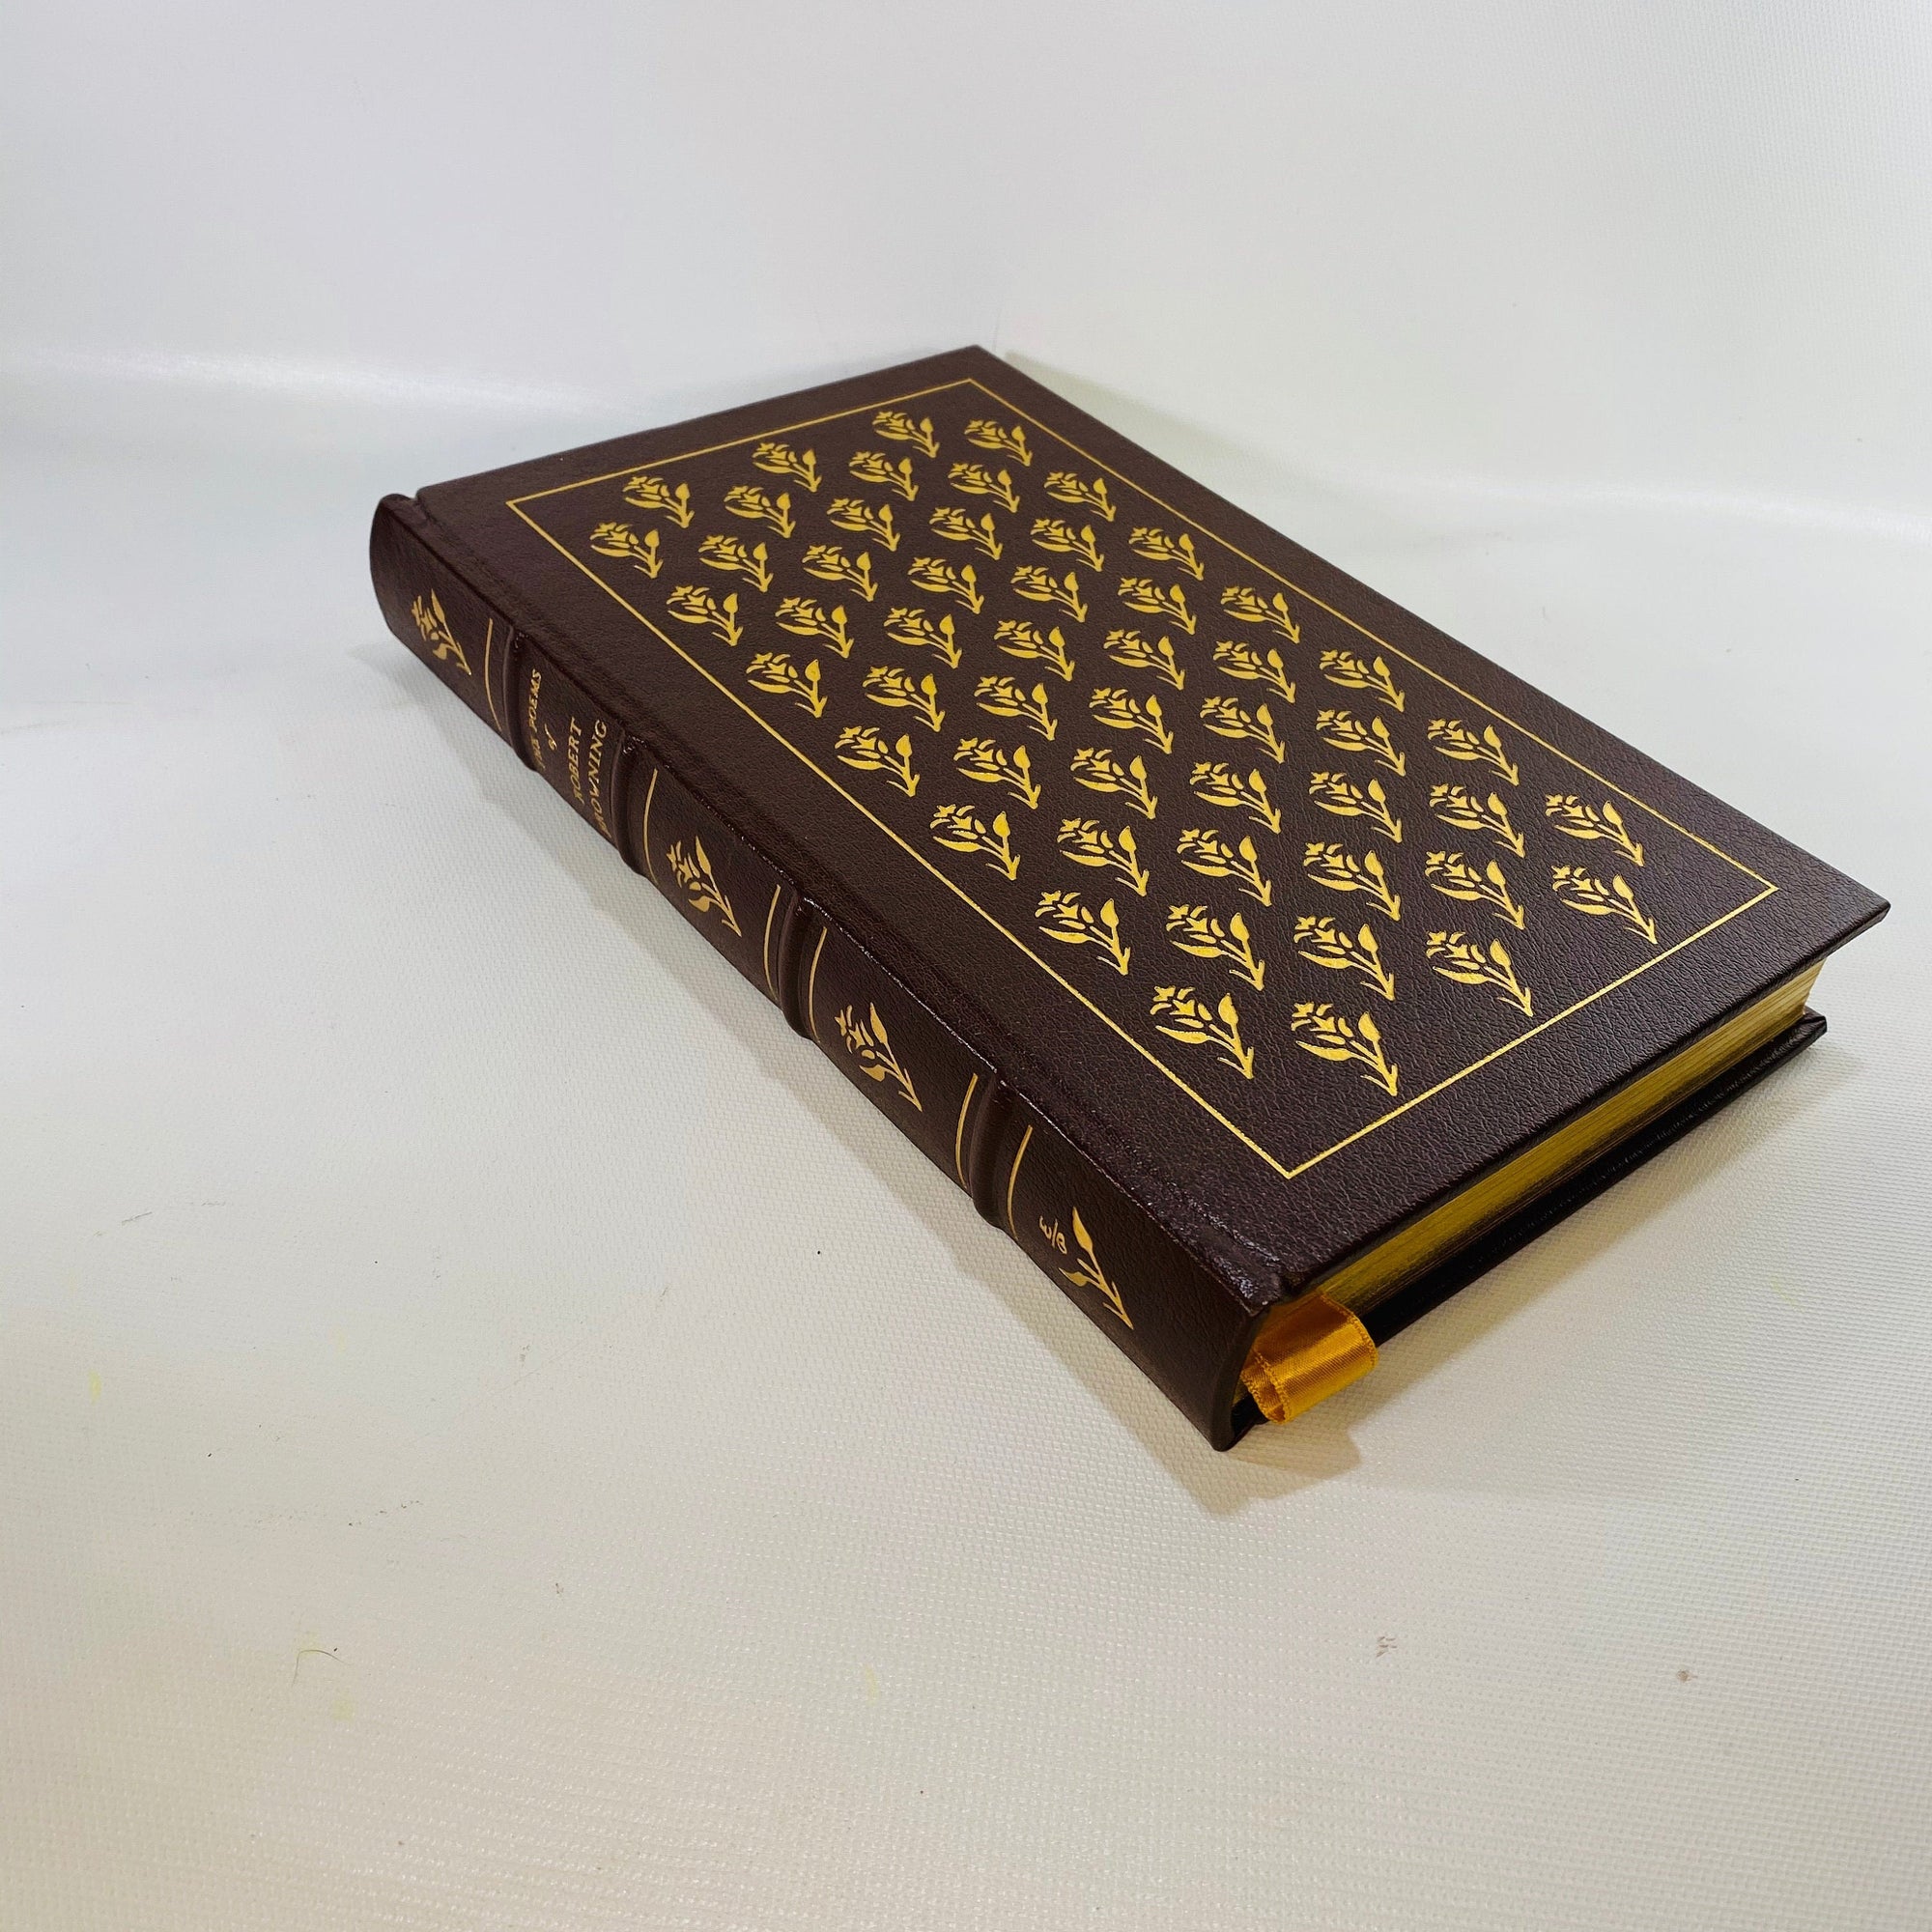 The Poems of Robert Browning illustrated with Wood Engravings 1979 Easton Press part of the 100 Greatest Books